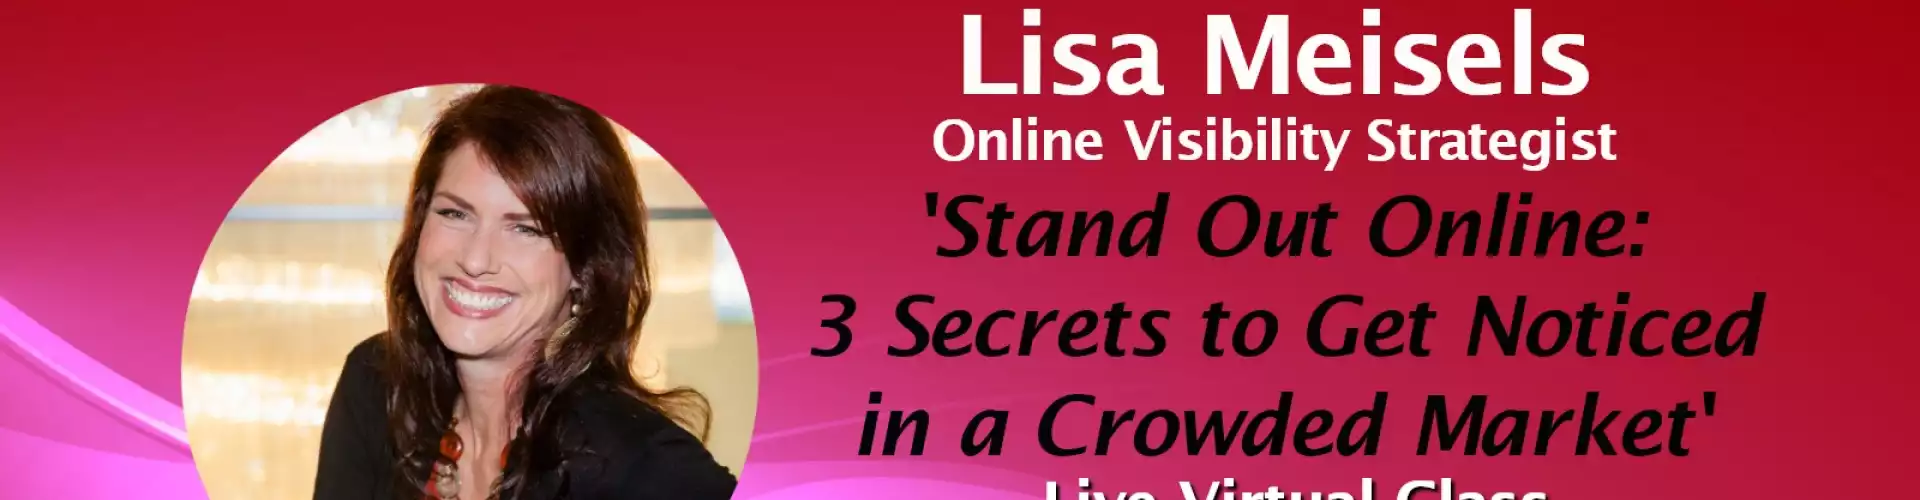 Stand Out Online: 3 Secrets to Get Noticed with WU Expert Lisa Meisels